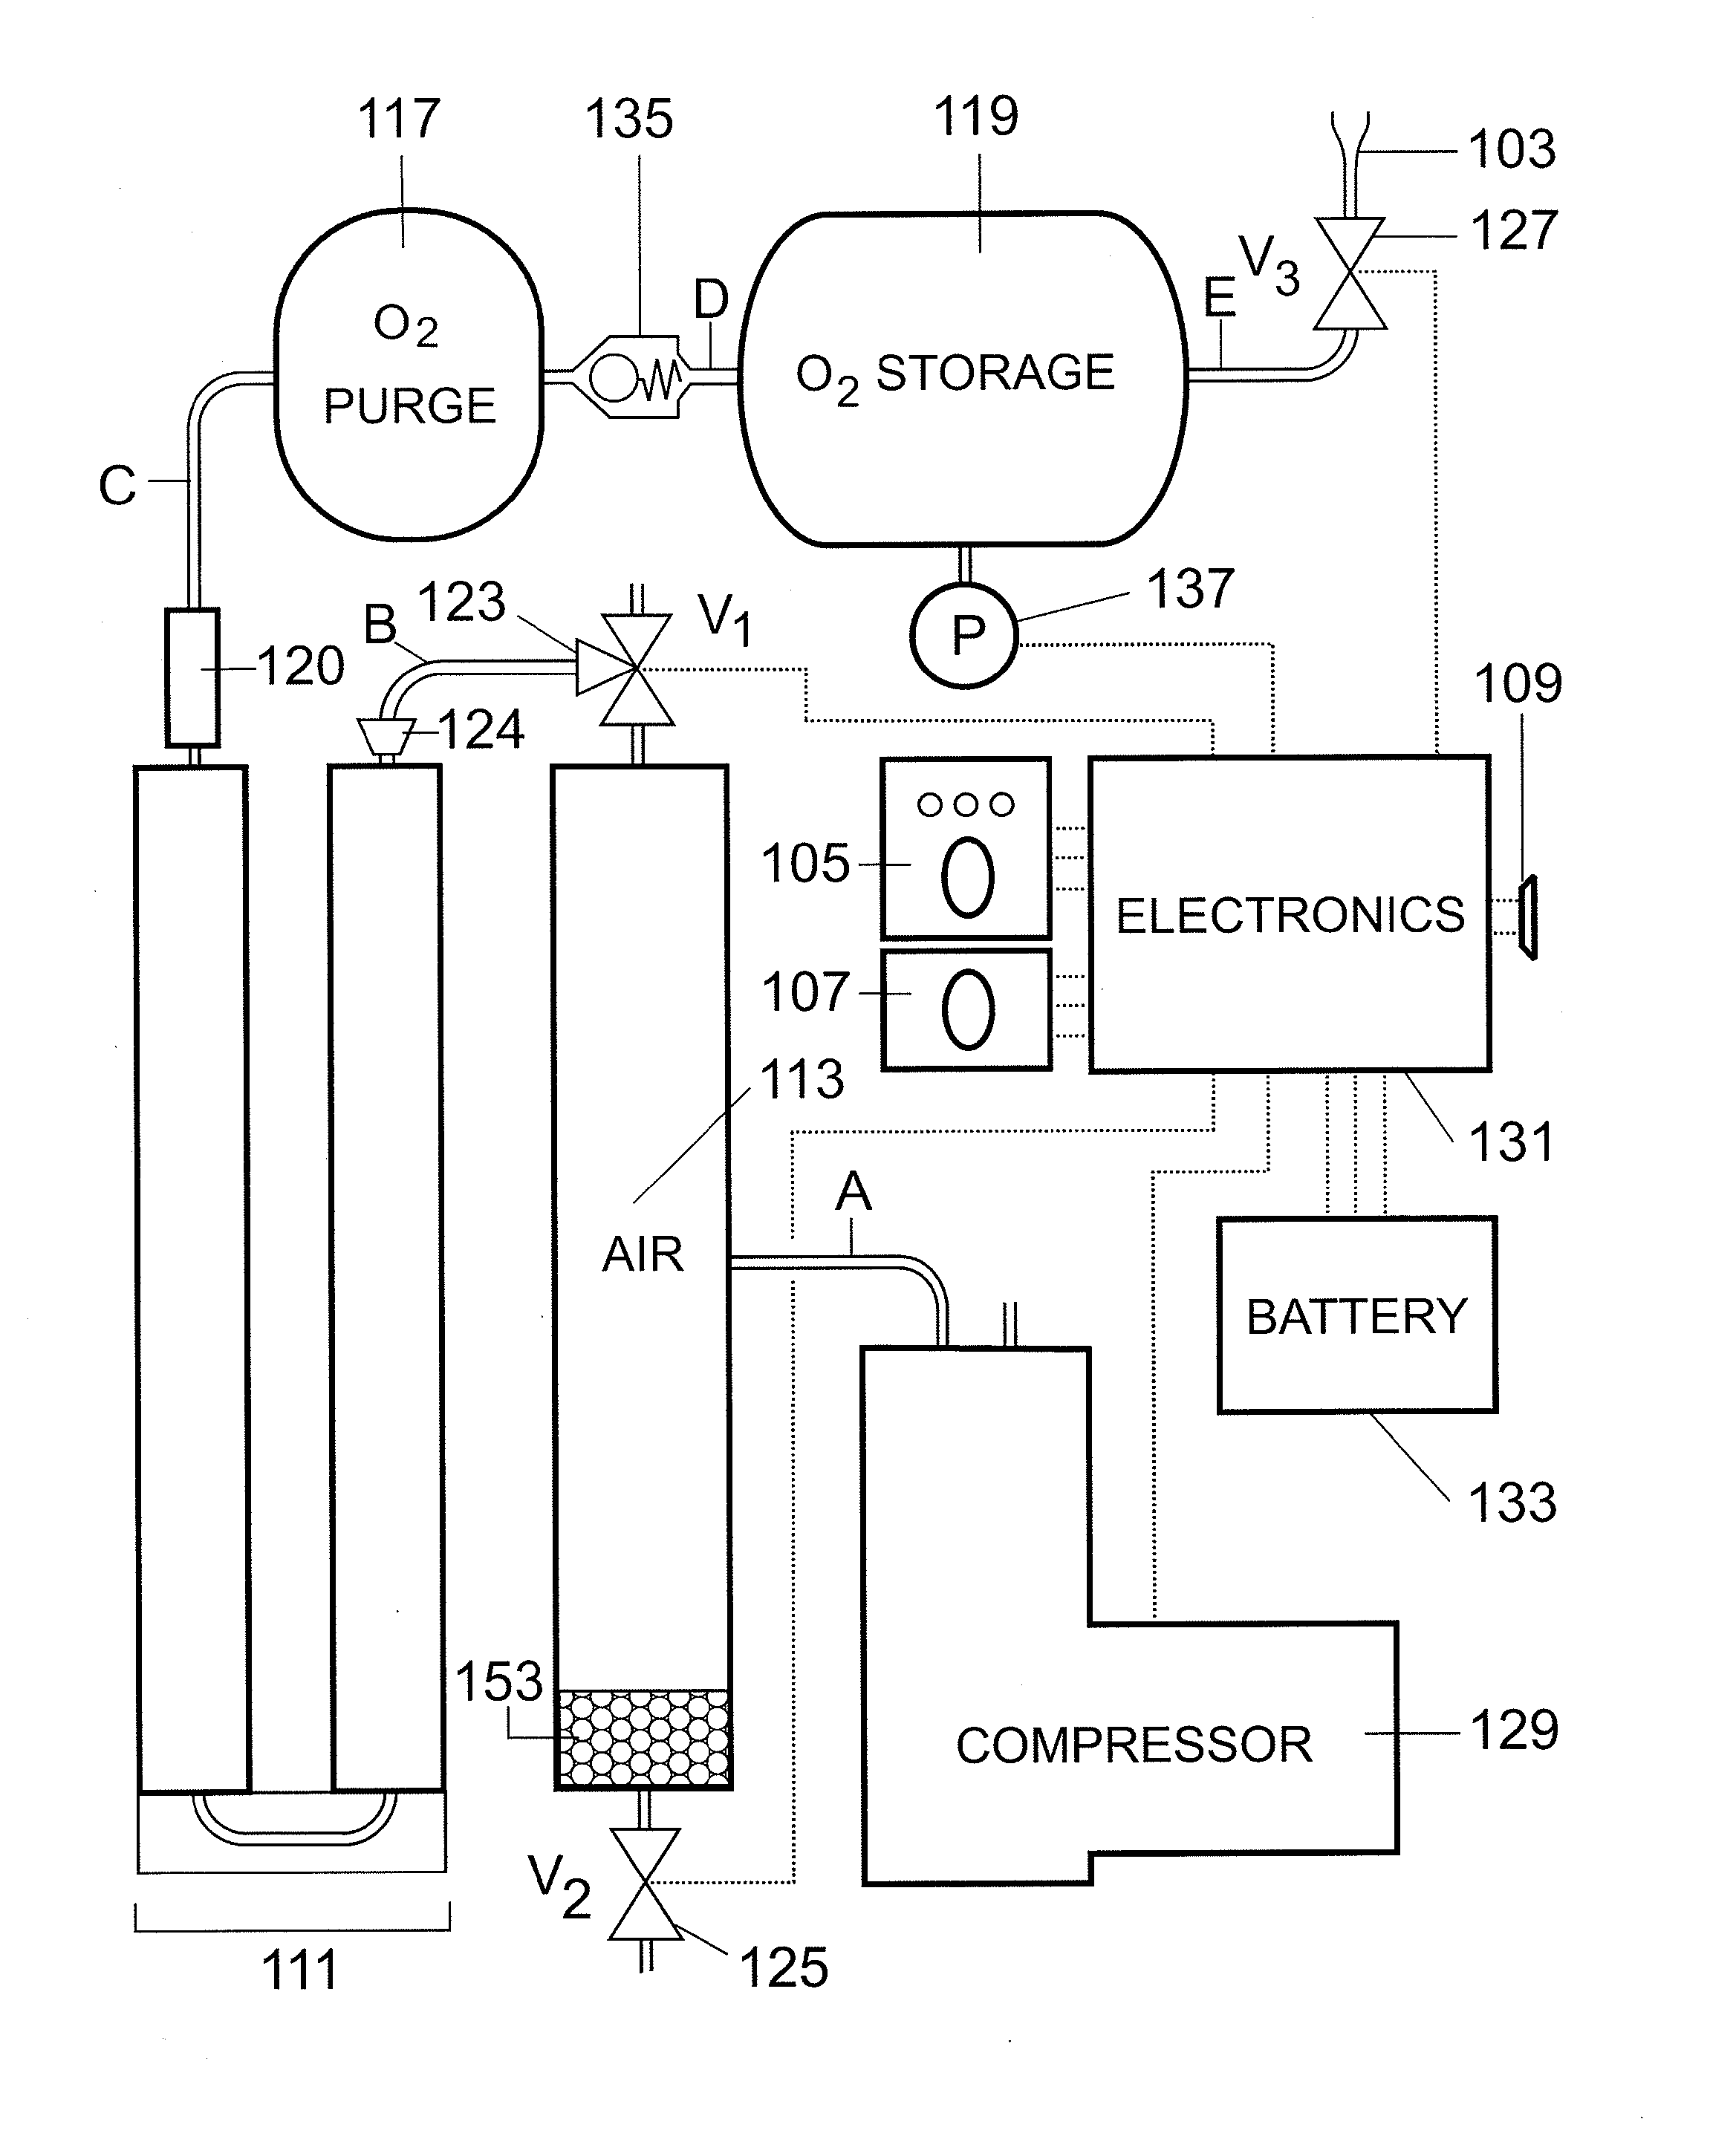 Portable oxygen enrichment device and method of use